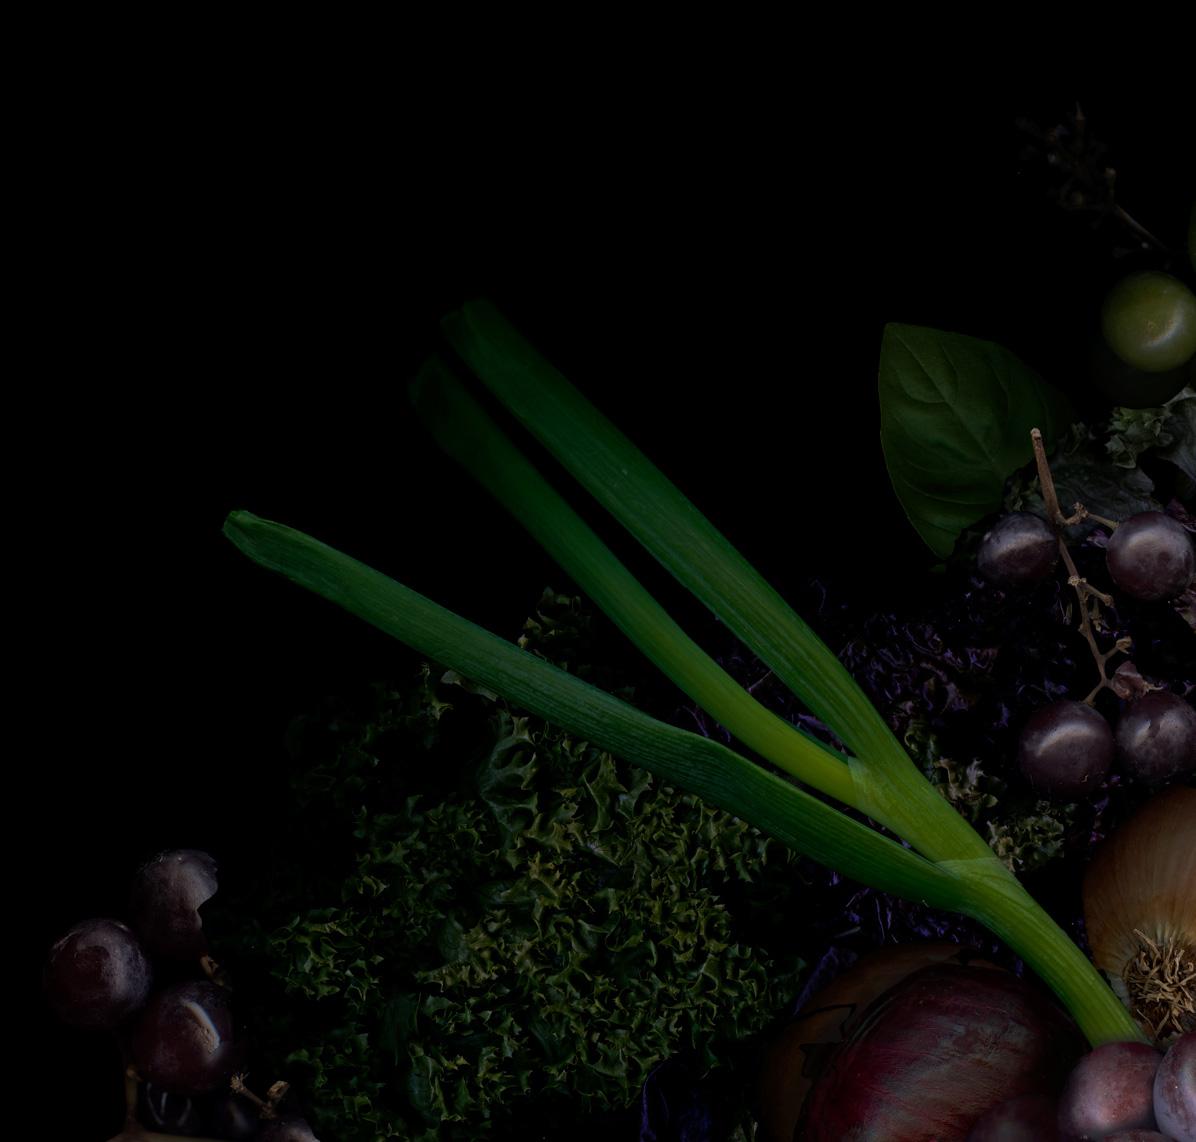 Fruits and vegetables from my garden #8 by Zoltan Gerliczki
From the Vegetables from my garden series
Archival Pigment Print 
Image size: 39 in H x 48 in W.
Edition of 9 + 2AP
Unframed
2021

